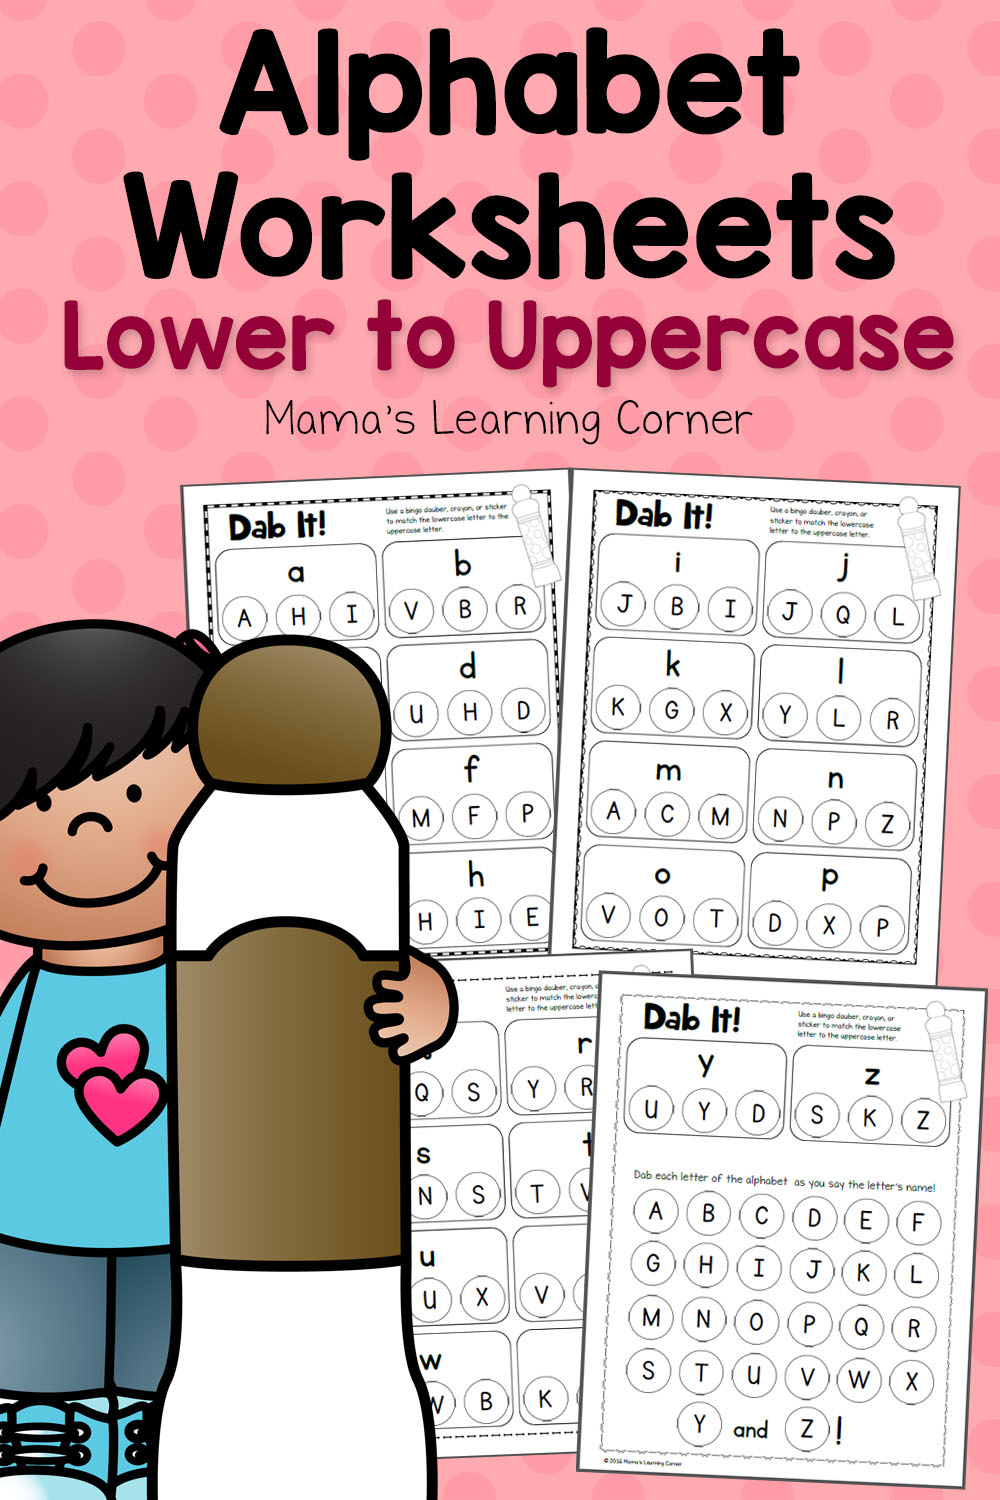 Dab It! Alphabet Worksheets  Match Lower and Uppercase Letters  Mamas Learning Corner